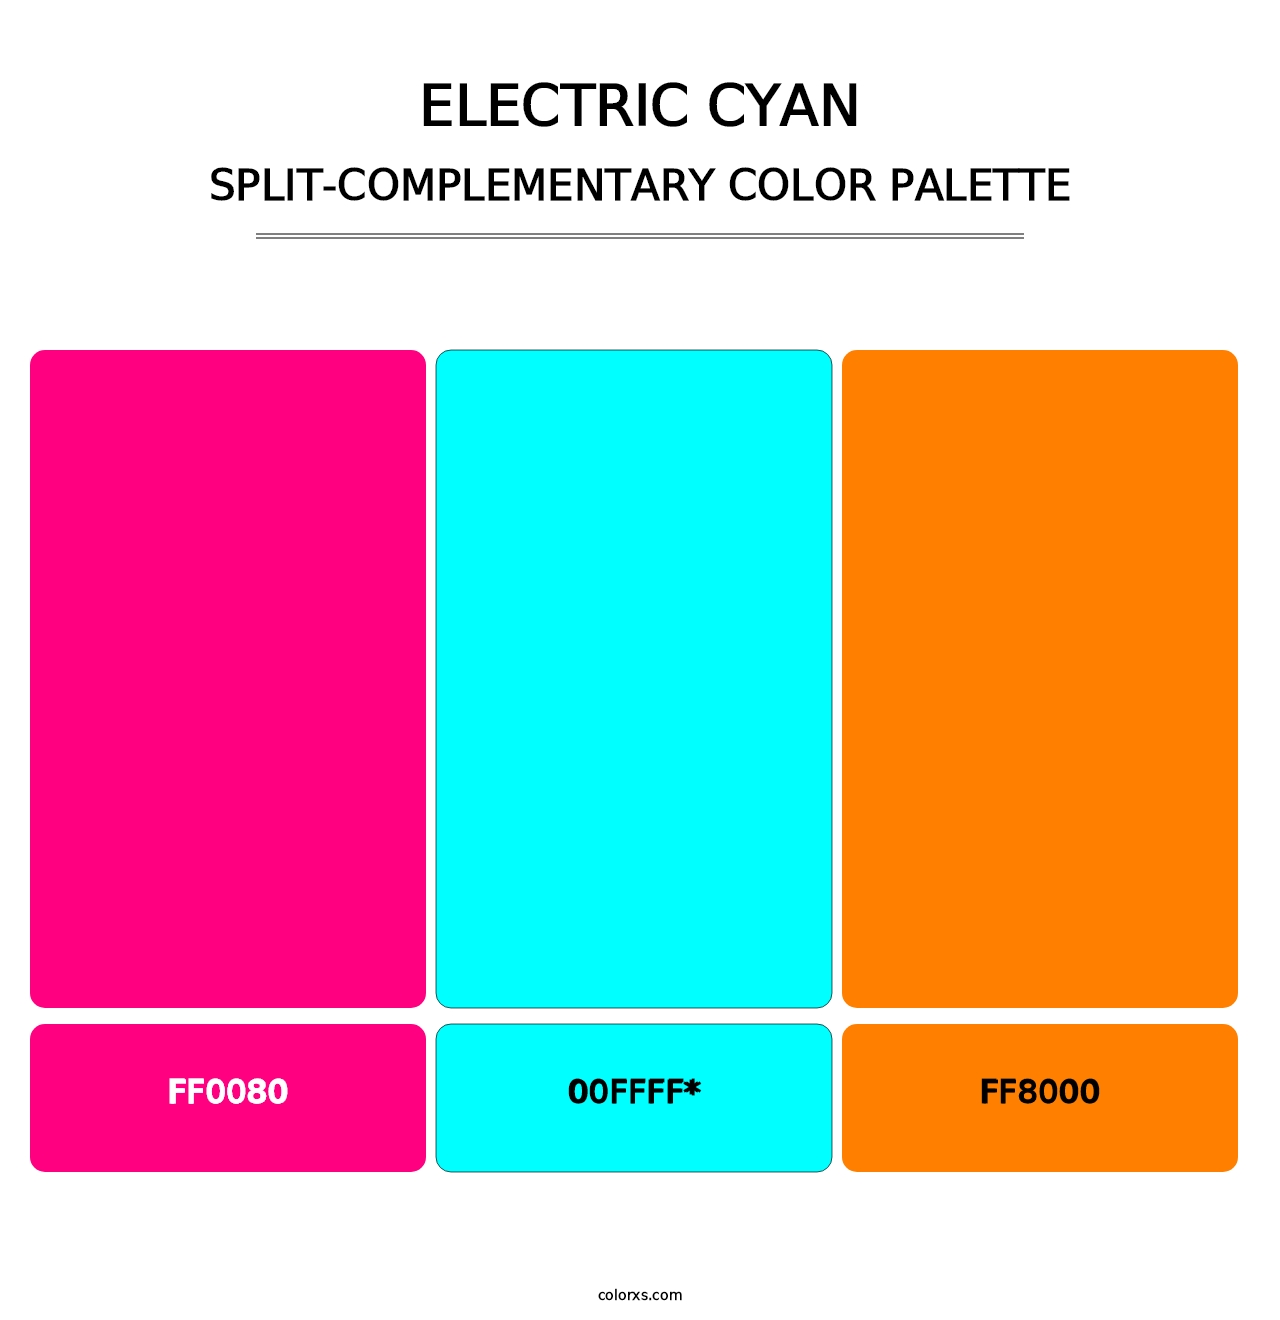 Electric Cyan - Split-Complementary Color Palette